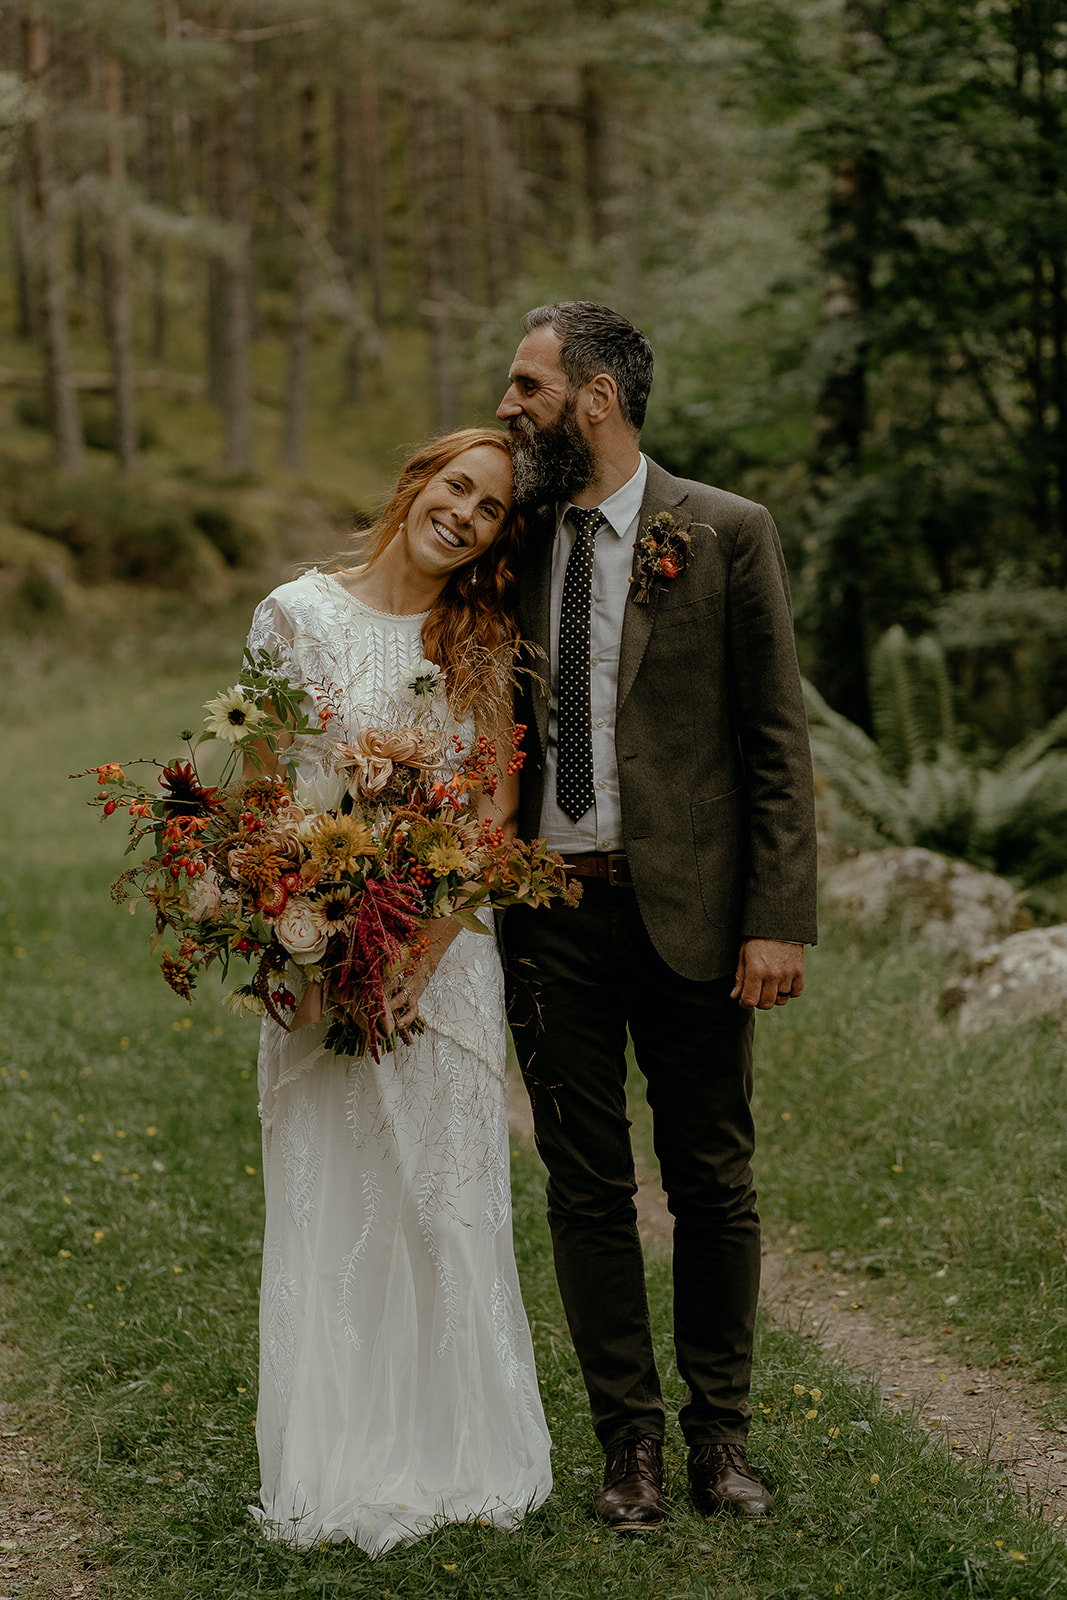 bearded groom kisses bride on the top of her head while she holds a beautiful bouquet of flowers